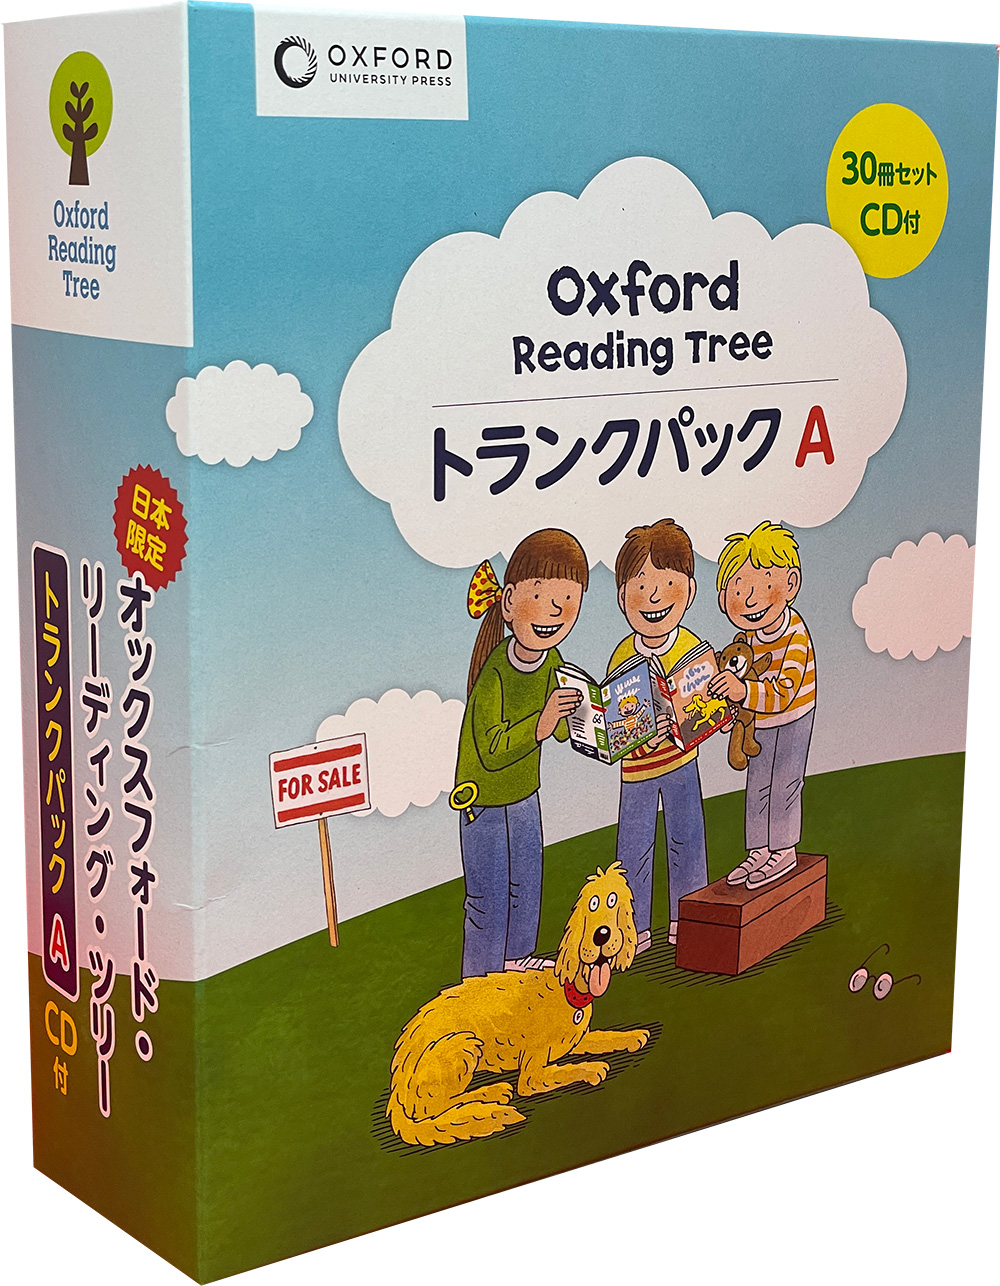 Oxford Reading Tree: Special Packs - Pack A Levels 1+ to 5 | 5 CD 